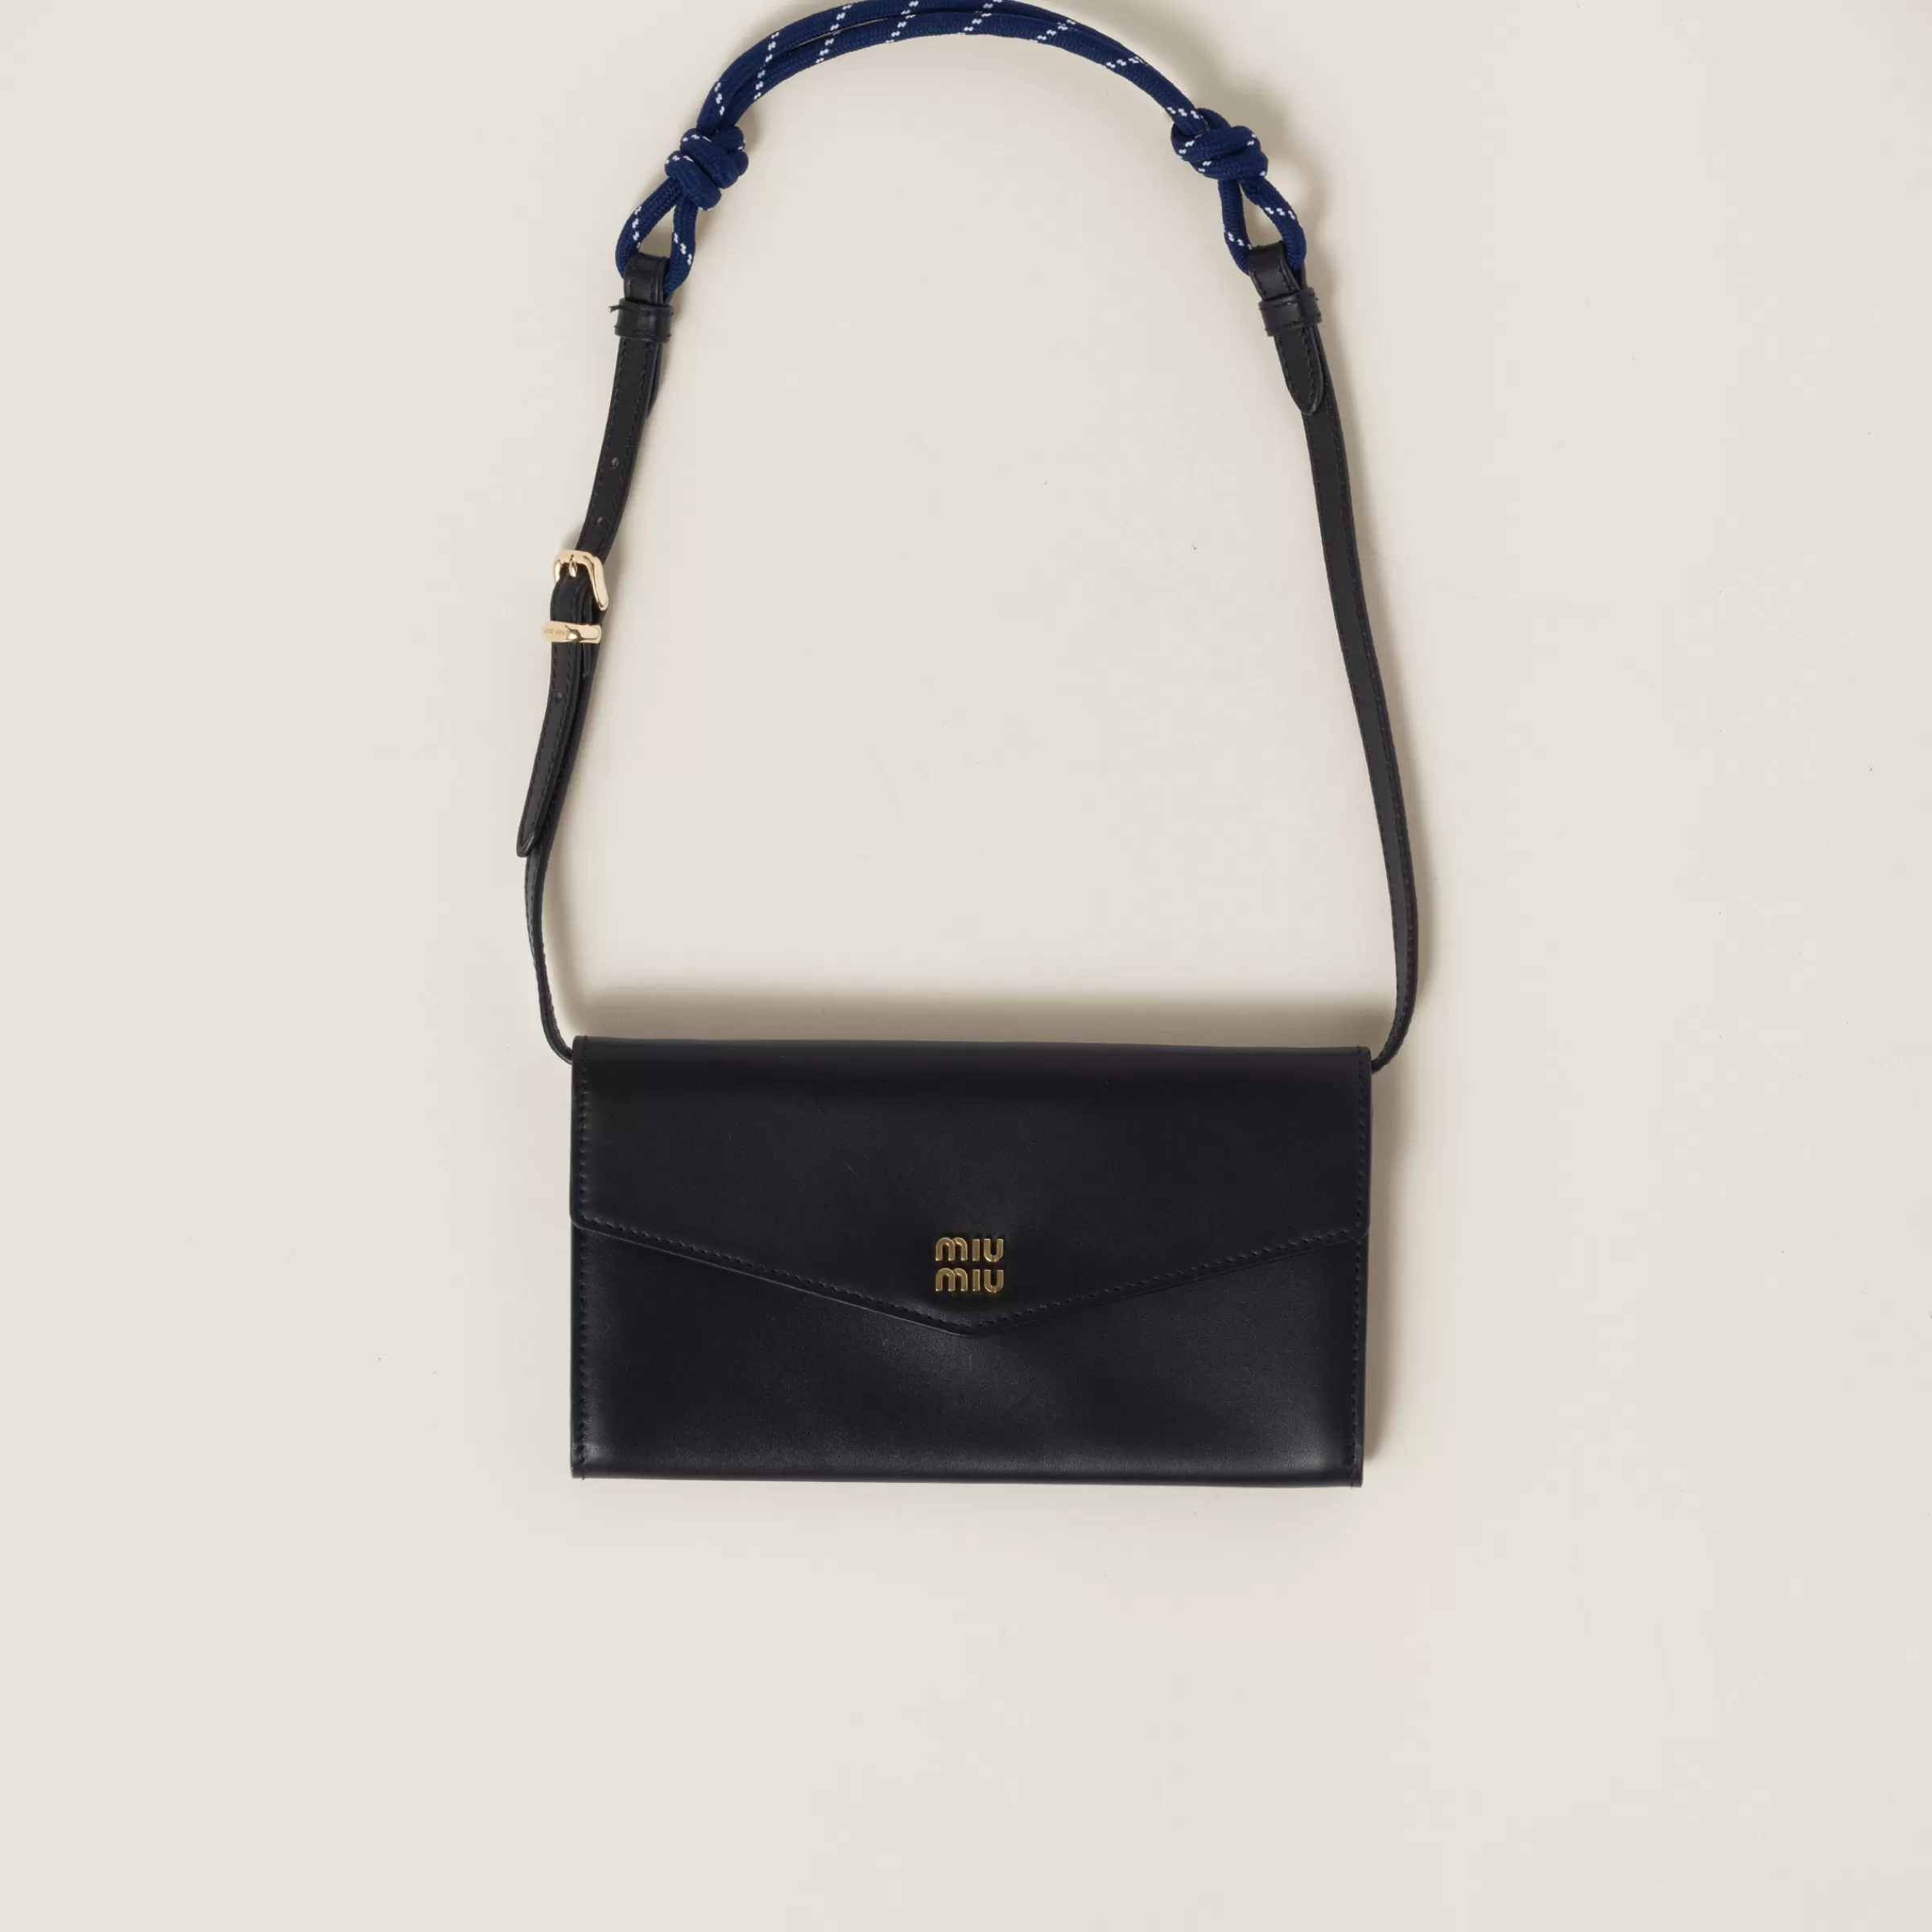 Miu Miu Leather Wallet With Leather And Cord Shoulder Strap |